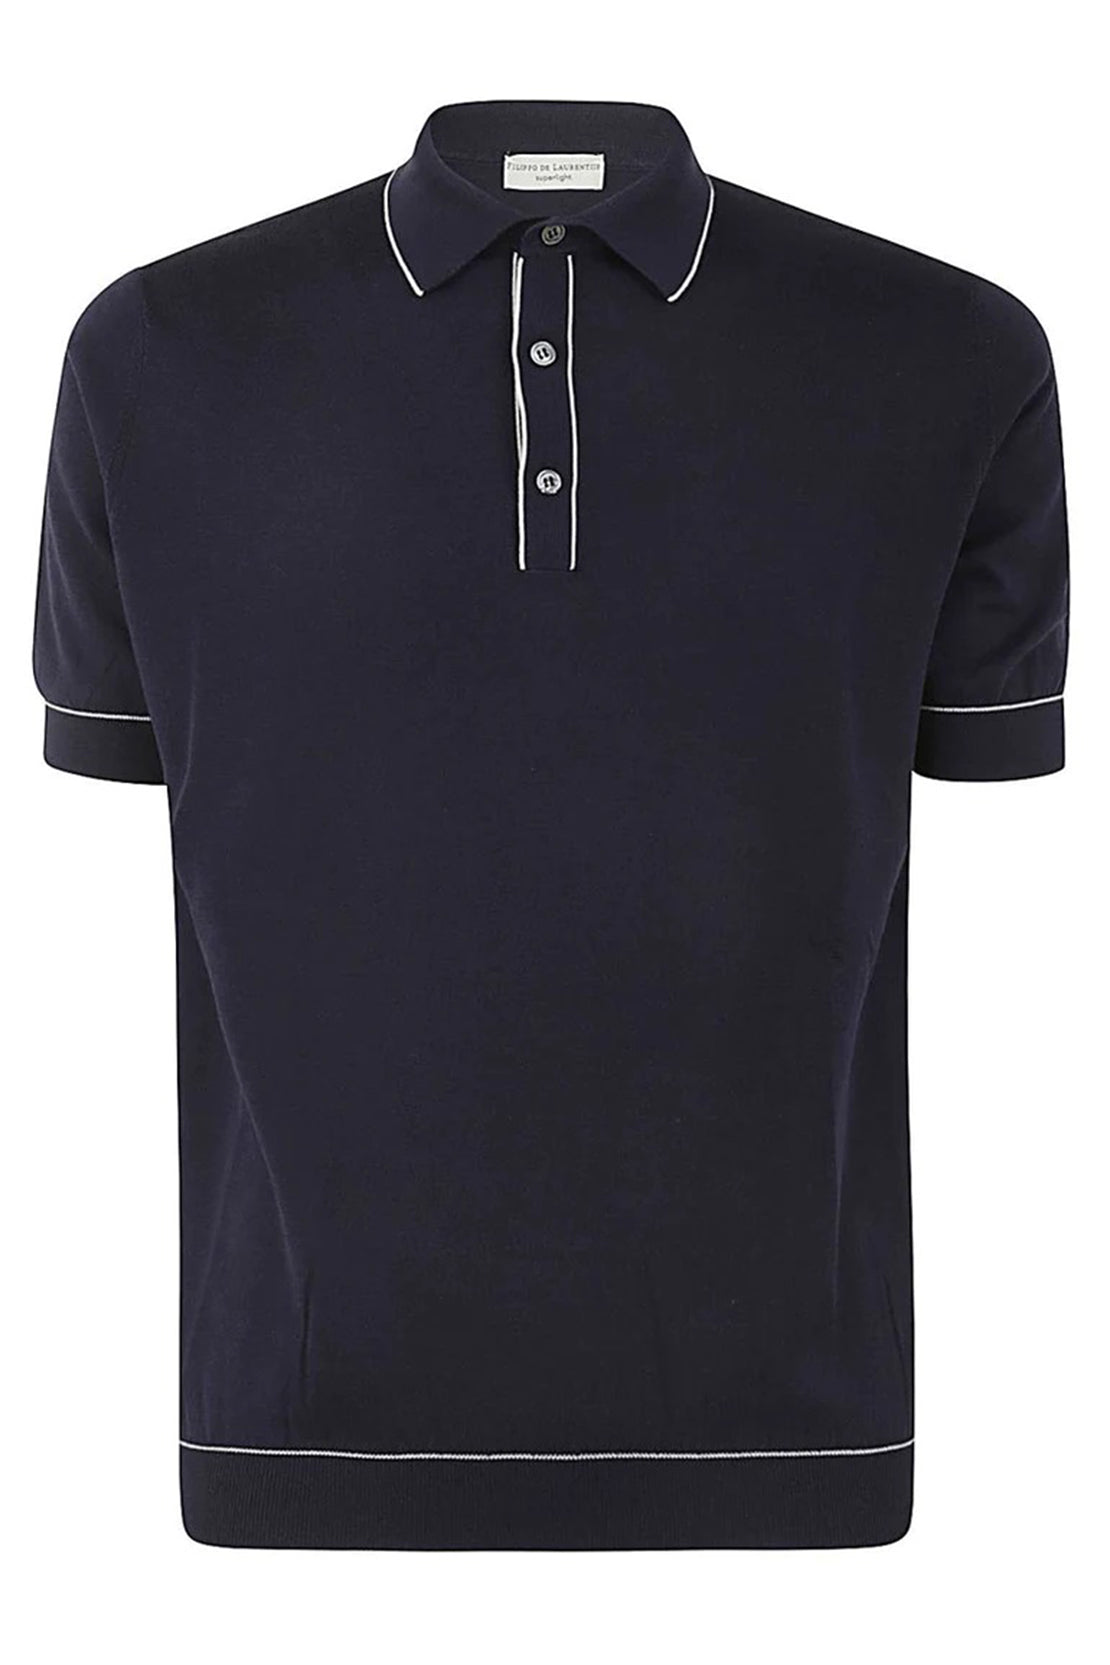 FILIPPO DE LAURENTIIS - Navy Blue Knitted Polo Shirt With Trim In Superlight Cotton